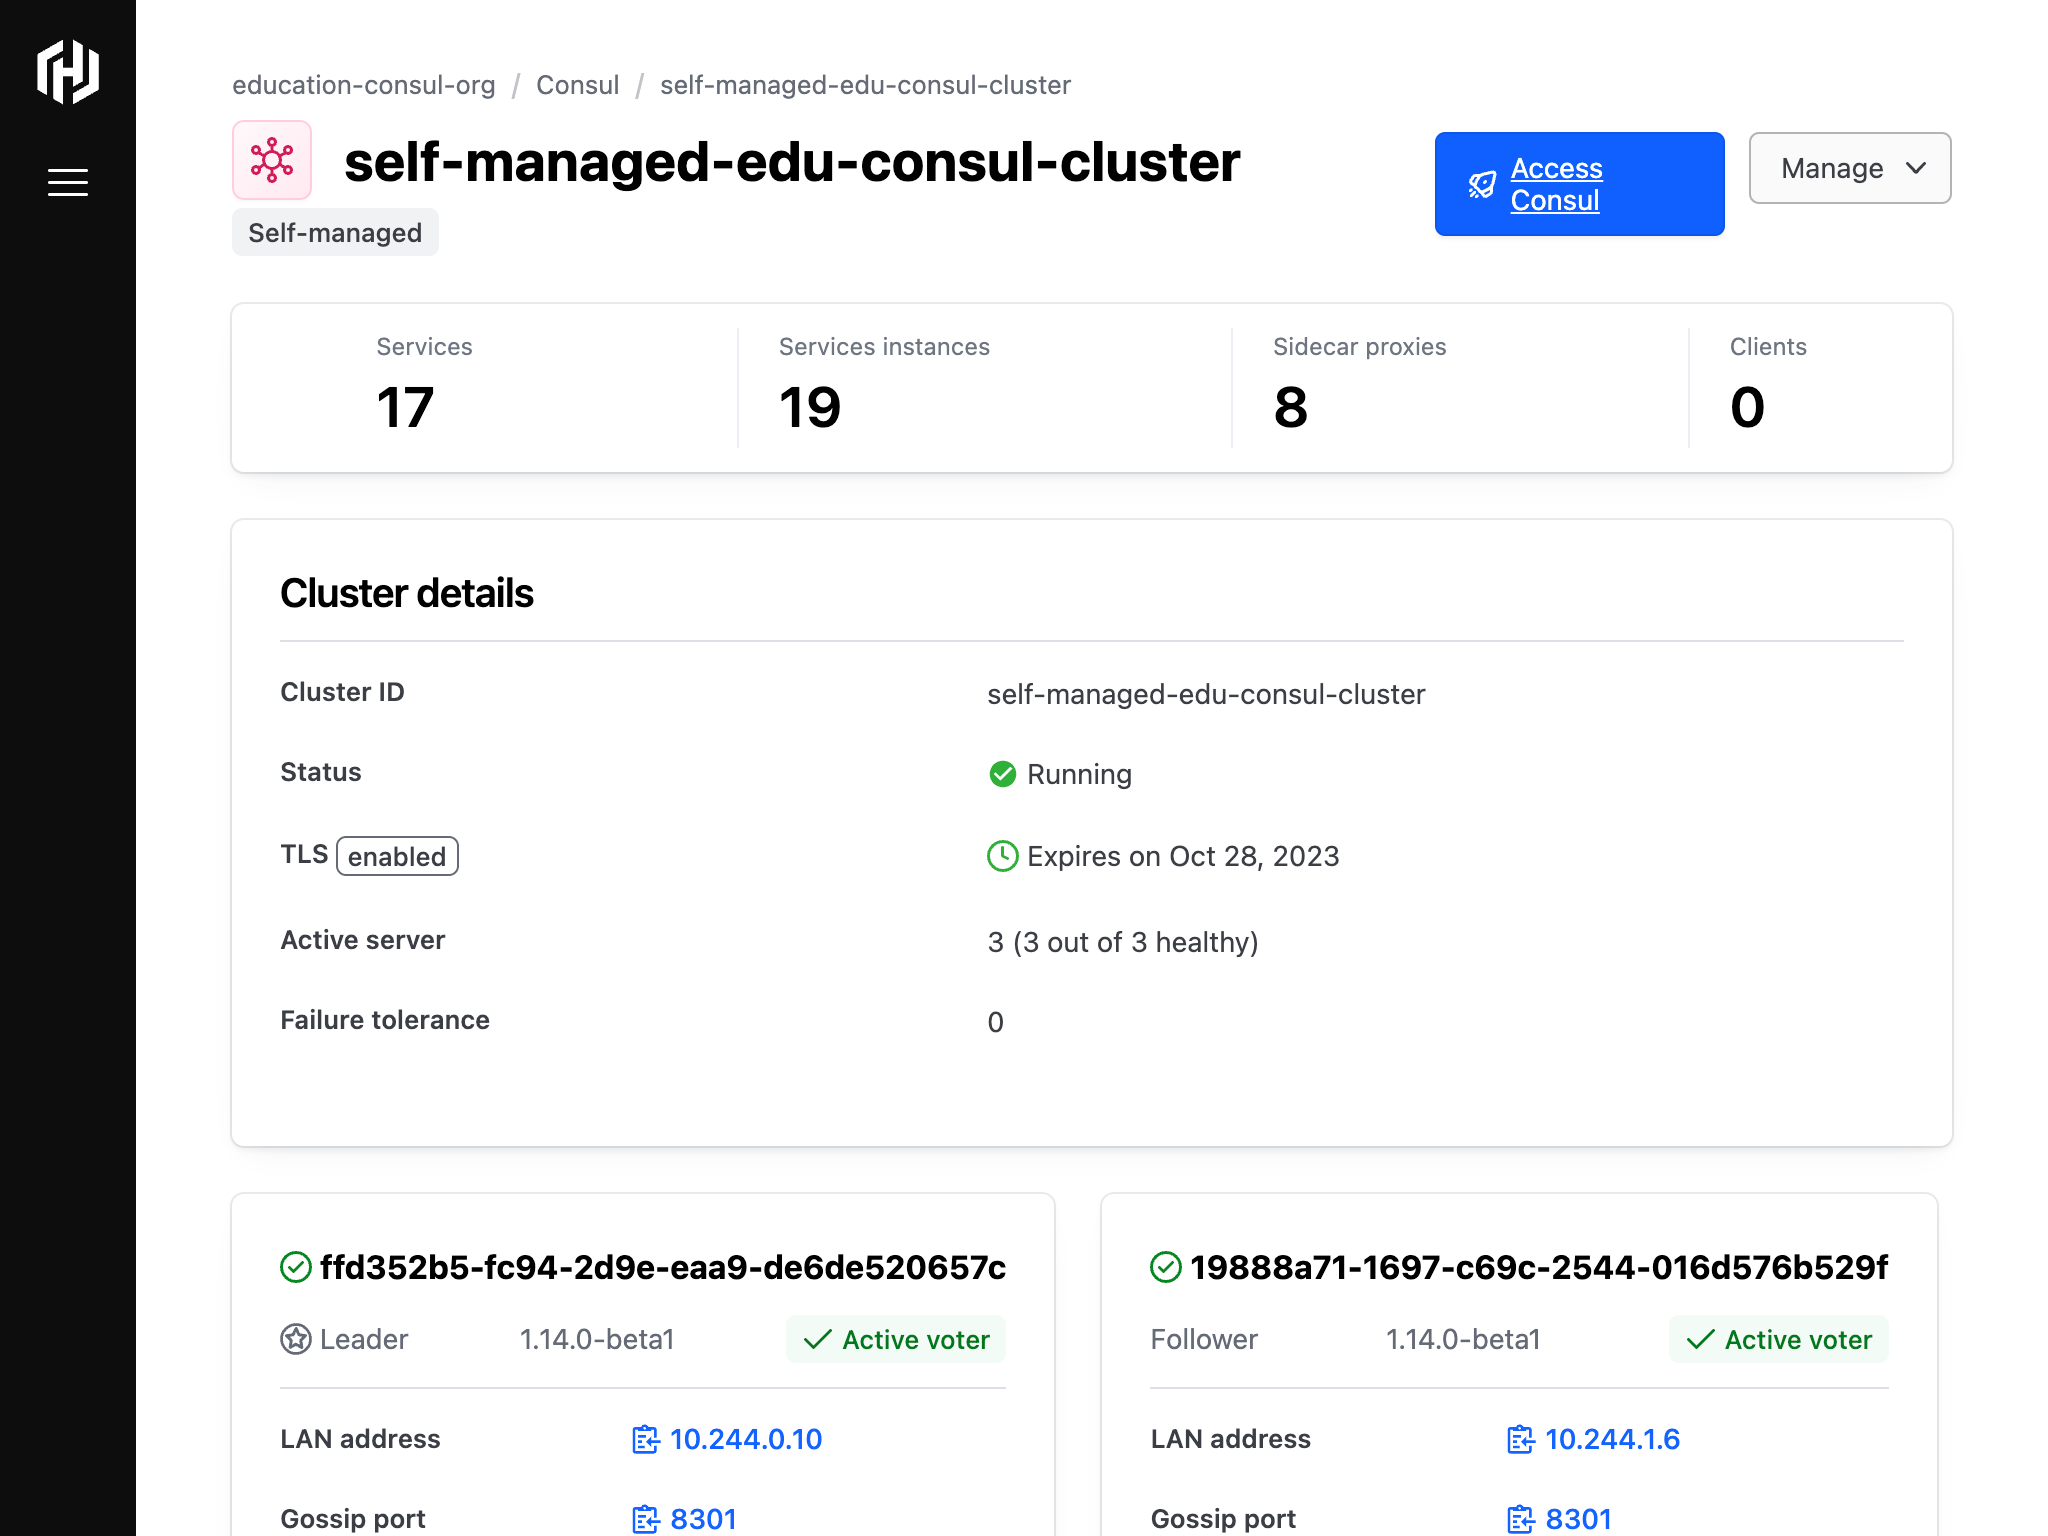 Self managed Consul cluster information that users can use to securely access to the Consul dashboard.